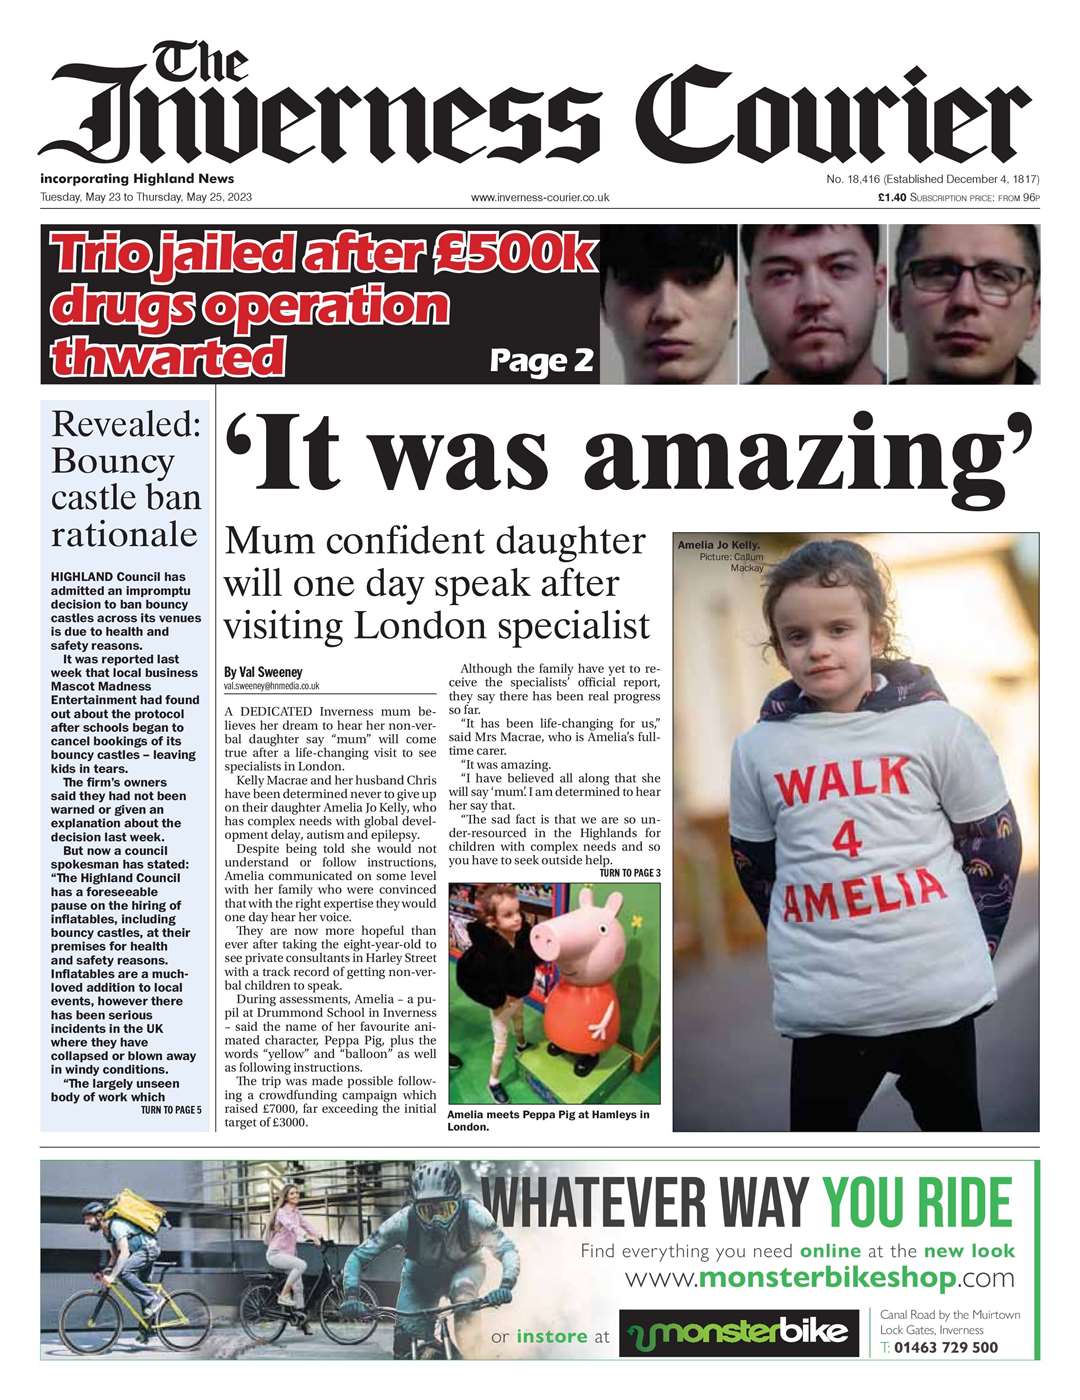 The Inverness Courier, May 23, front page.